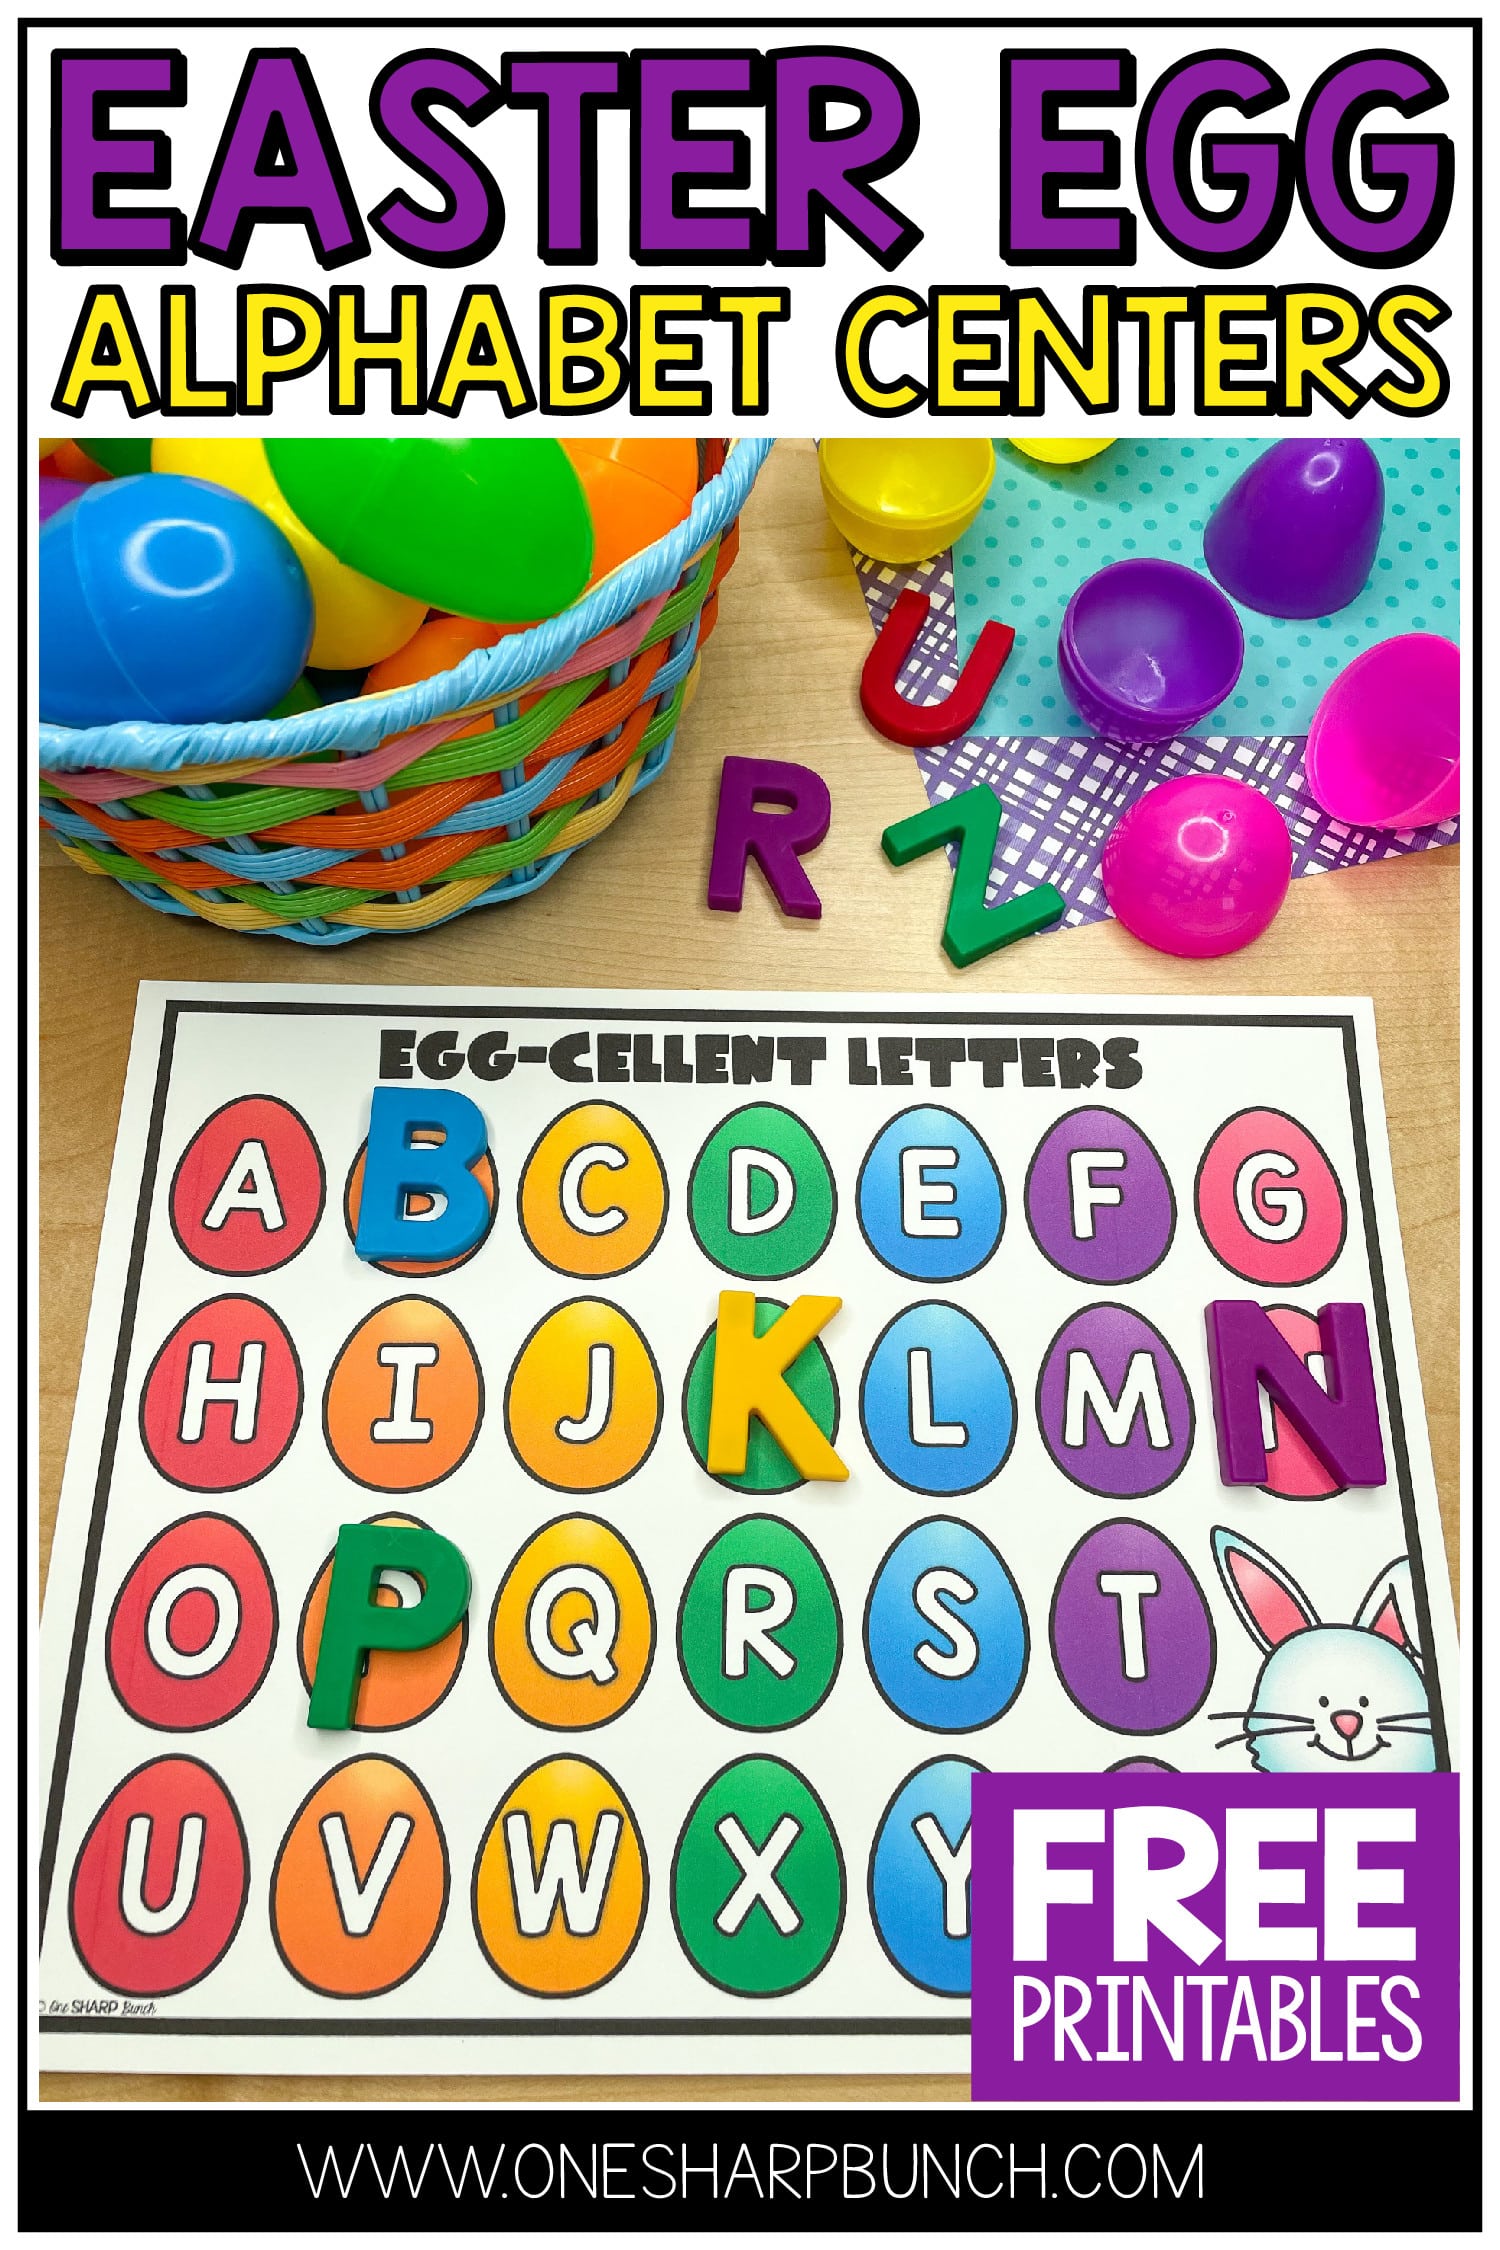 Don't fill those plastic Easter eggs with candy! Instead, fill them with magnetic letters and use them for alphabet activities! These FREE Easter egg alphabet centers are sure to add just enough magic to keep your preschool and kindergarten students engaged, without them realizing they are actually practicing letter recognition! Perfect for your literacy centers and magnetic letter activities! #preschool #kindergarten #alphabetactivities #teacher #easter #magneticletters #literacycenters